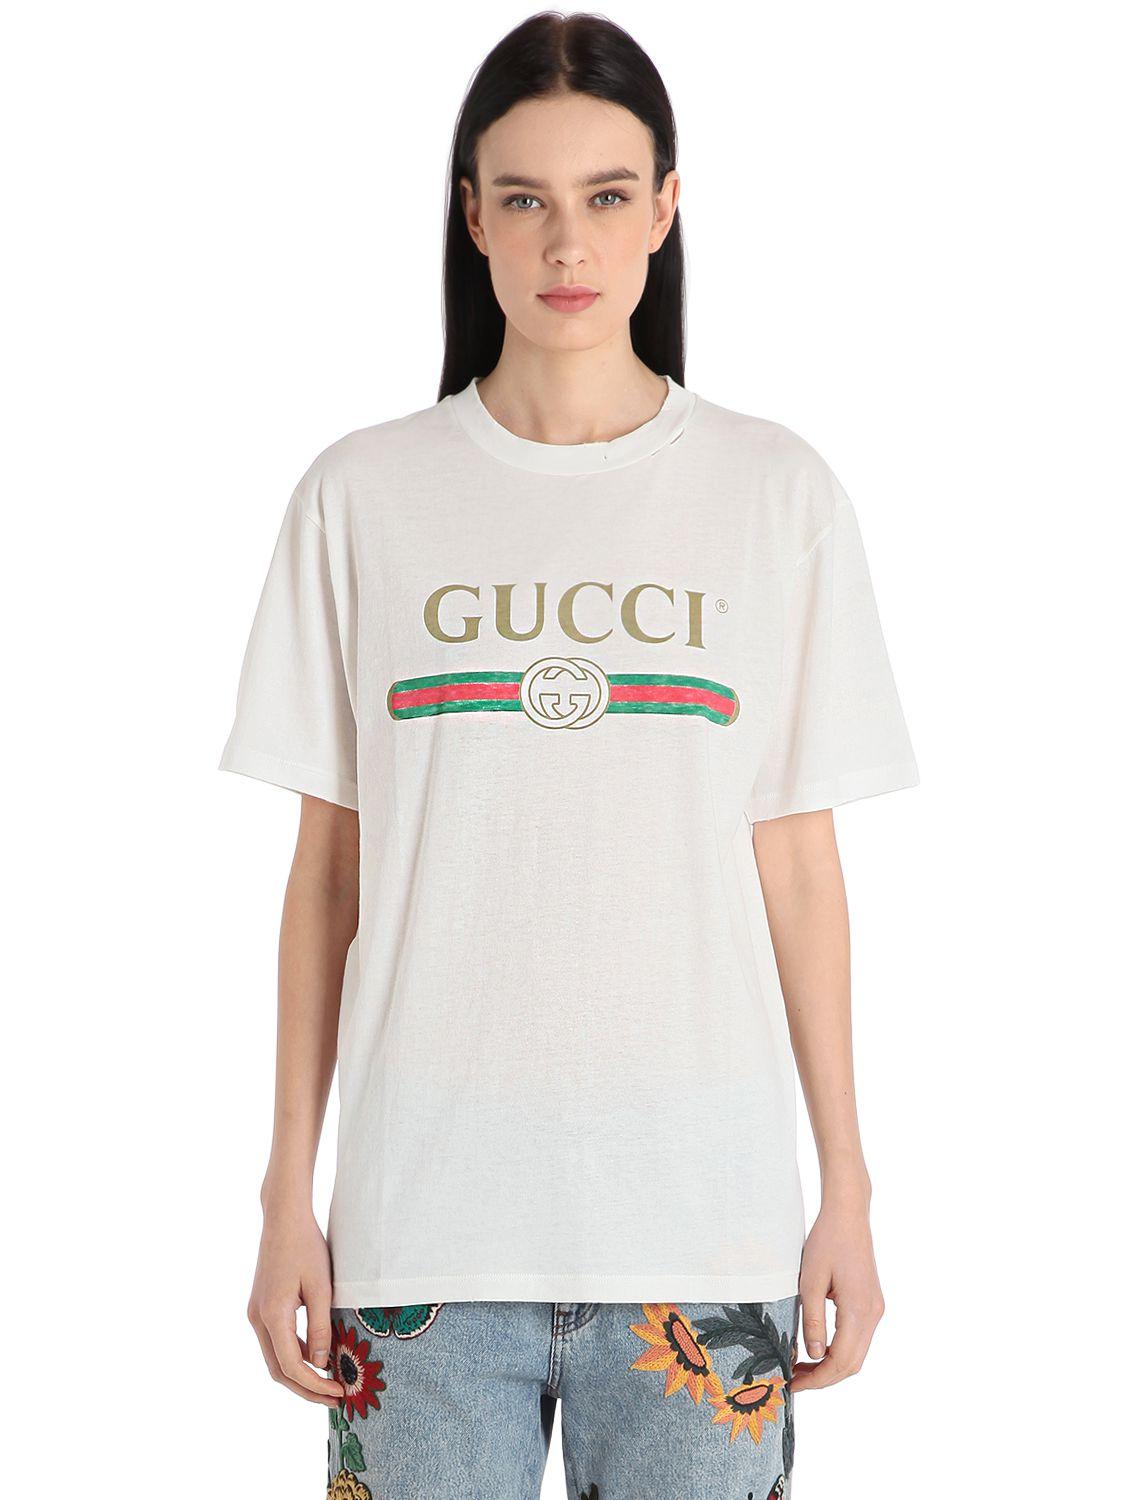 Lyst - Gucci Logo & Embroidery Cotton Jersey T-shirt in White